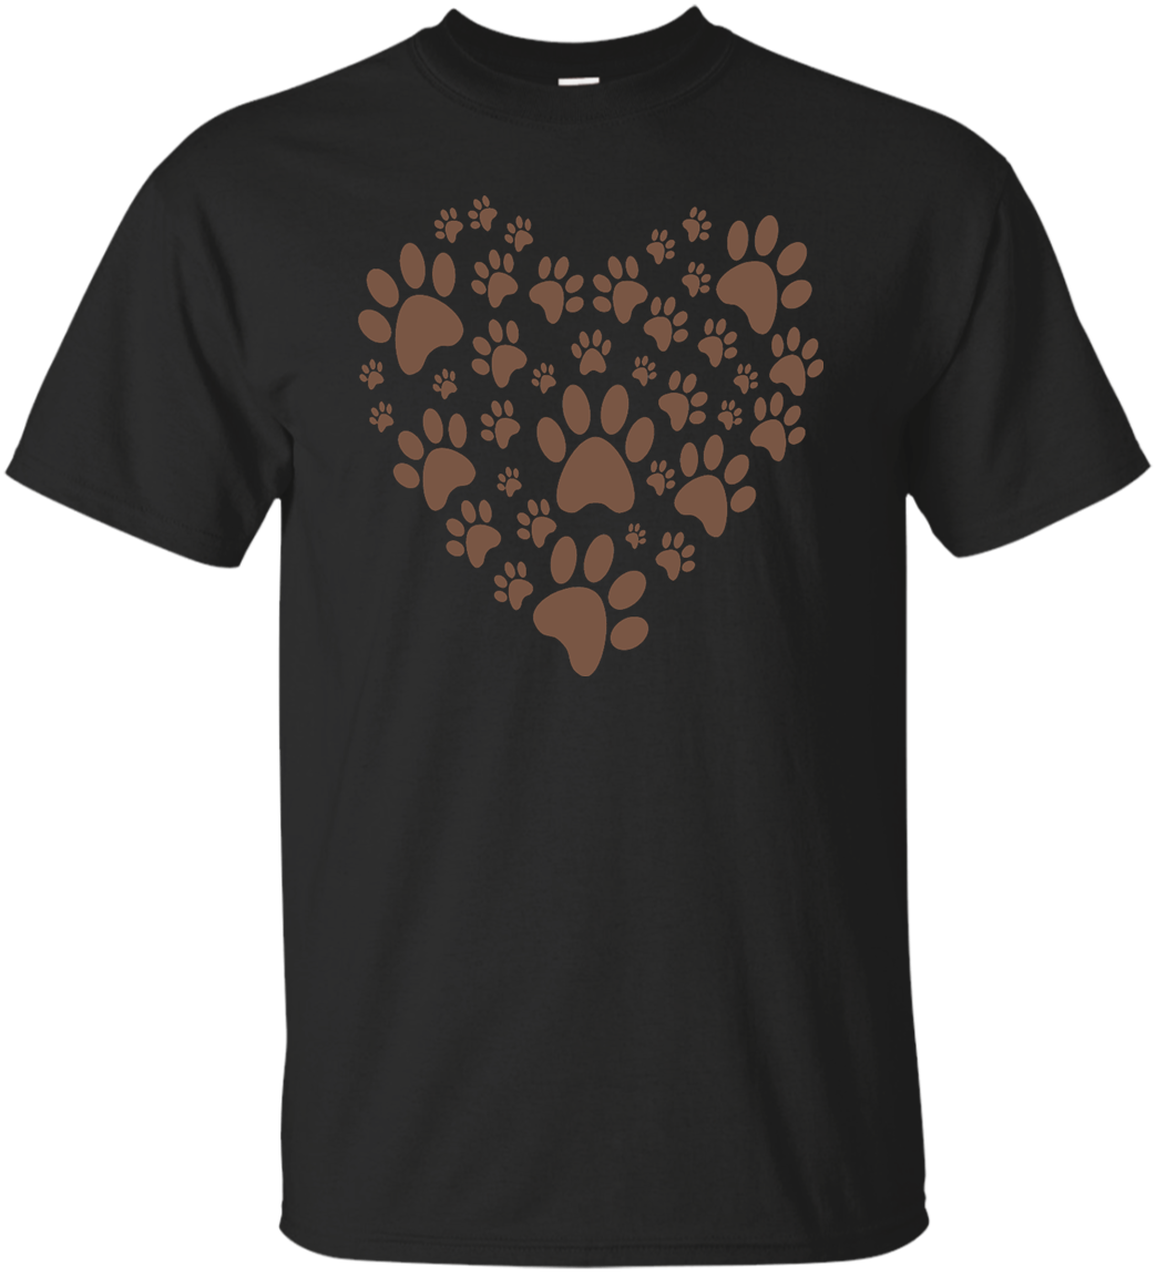 A Black Shirt With A Heart Of Paw Prints